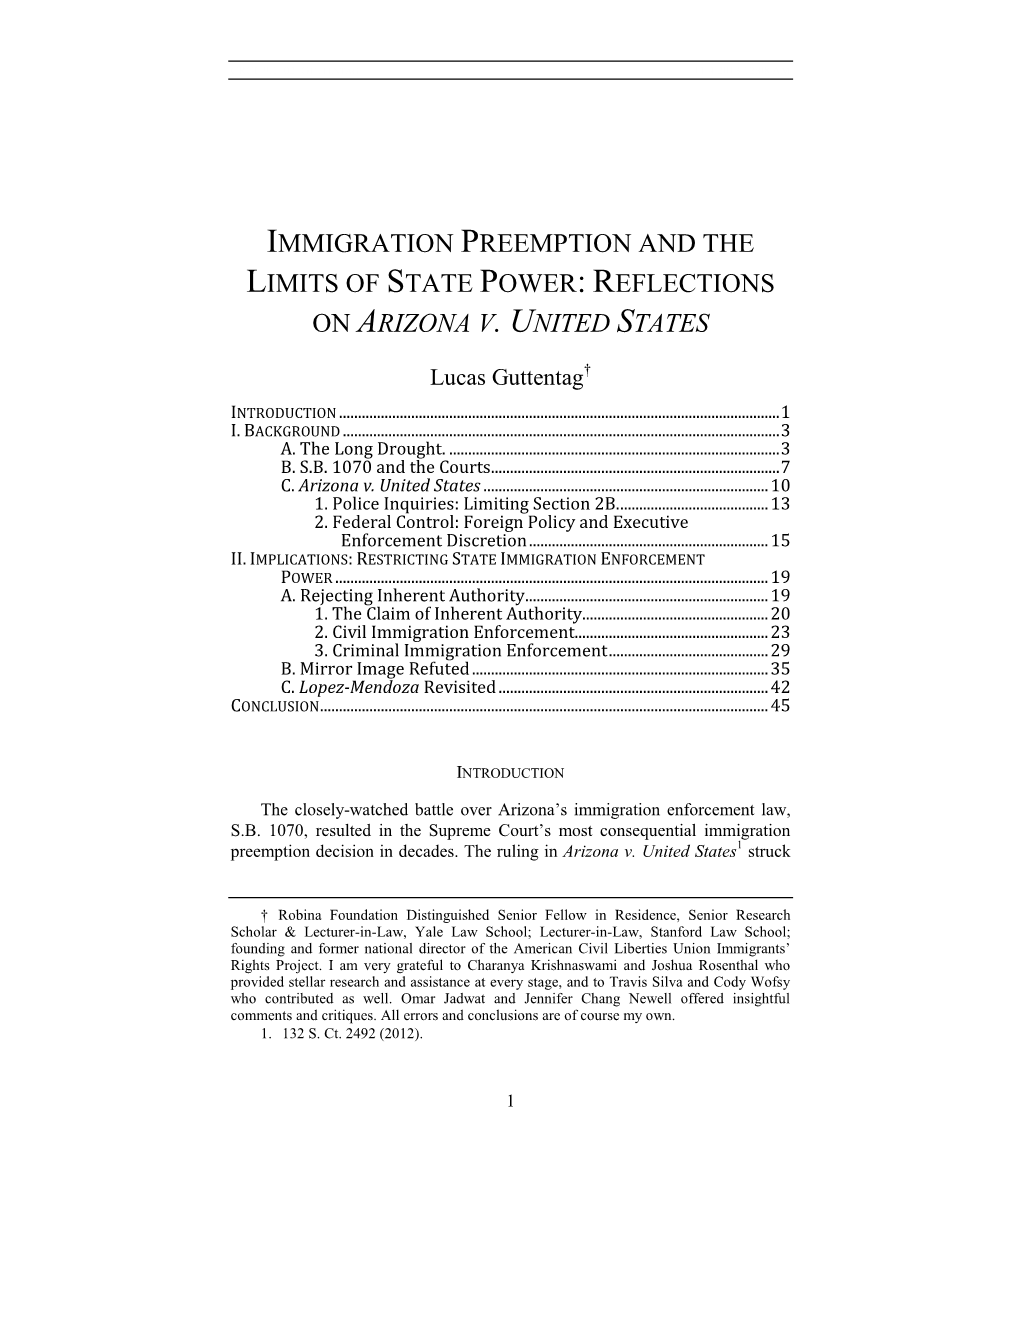 Immigration Preemption and the Limits of State Power: Reflections on Arizona V